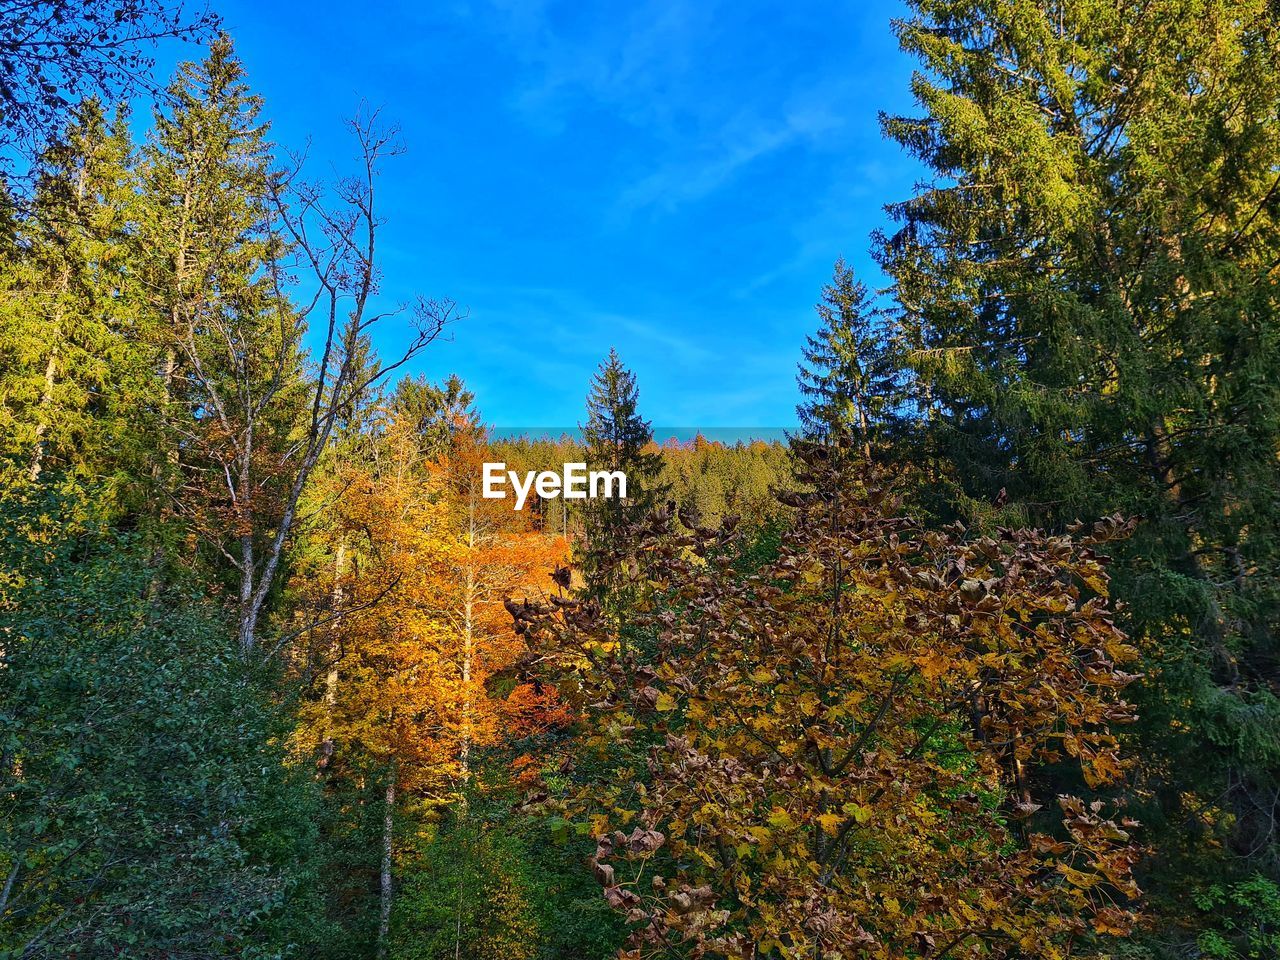 Plants and trees in forest during autumn